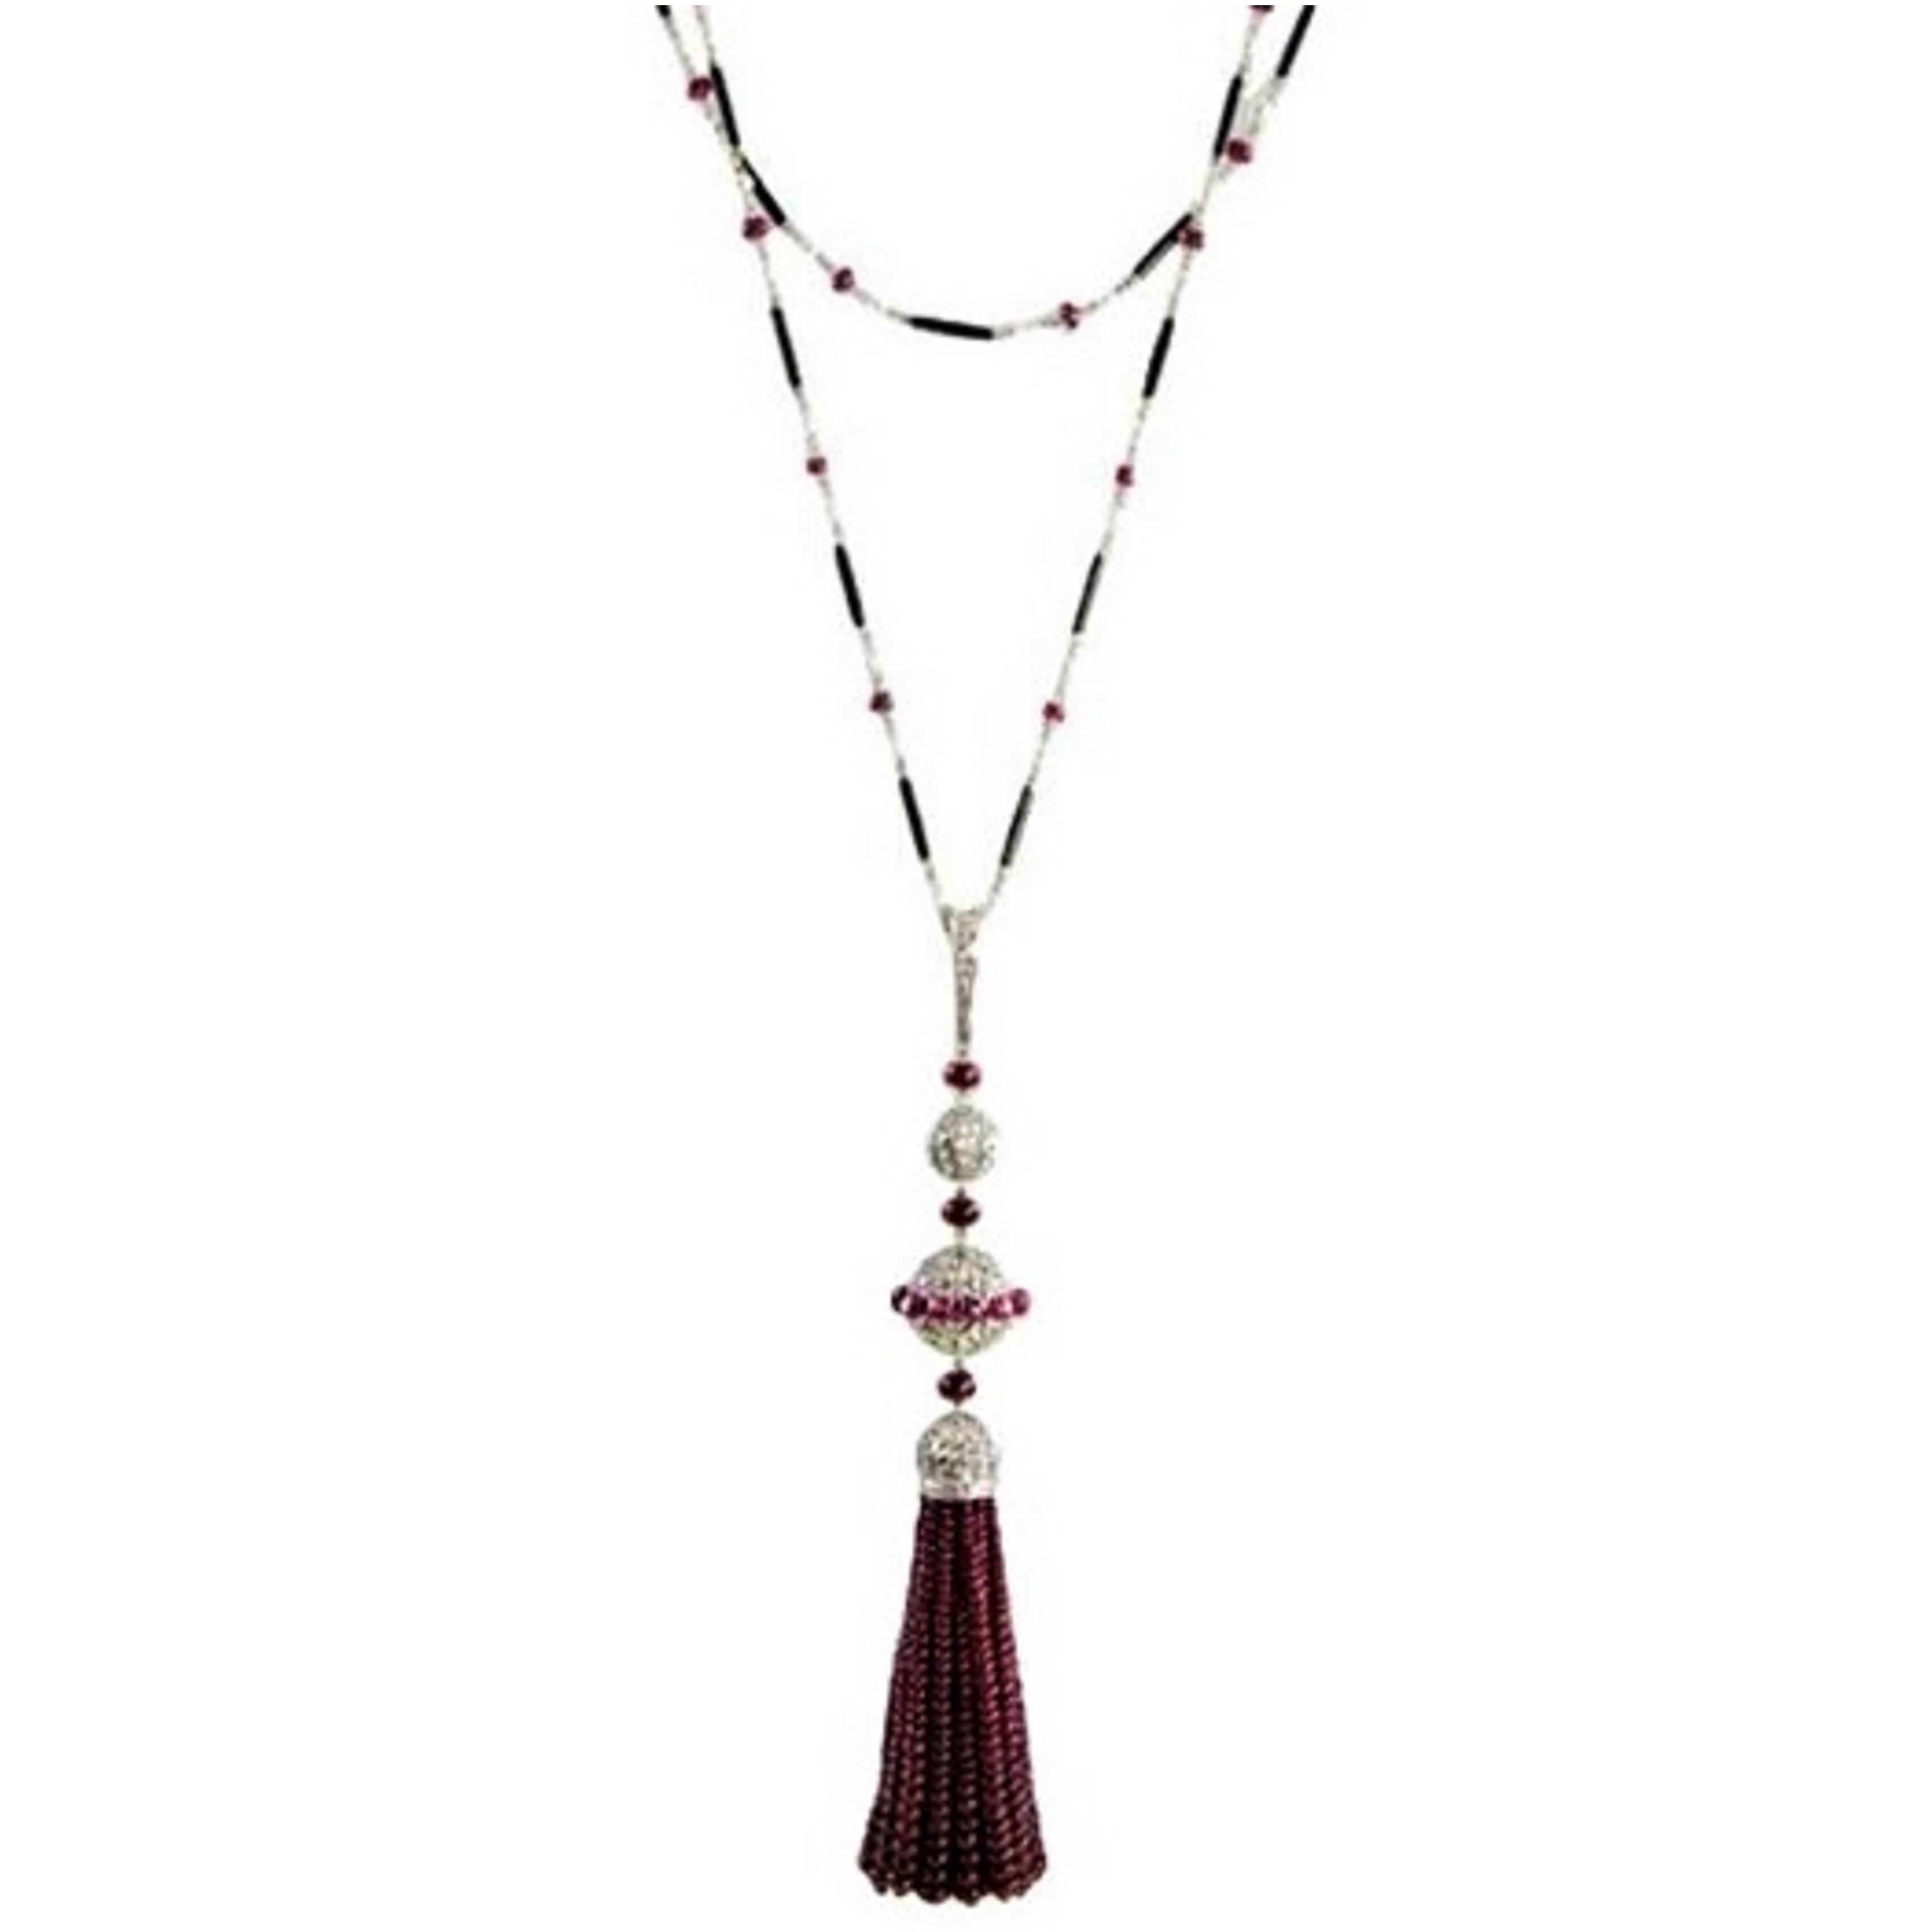 5.30 Carat Diamond, Ruby, Pearl & Gold Tassel Necklace For Sale